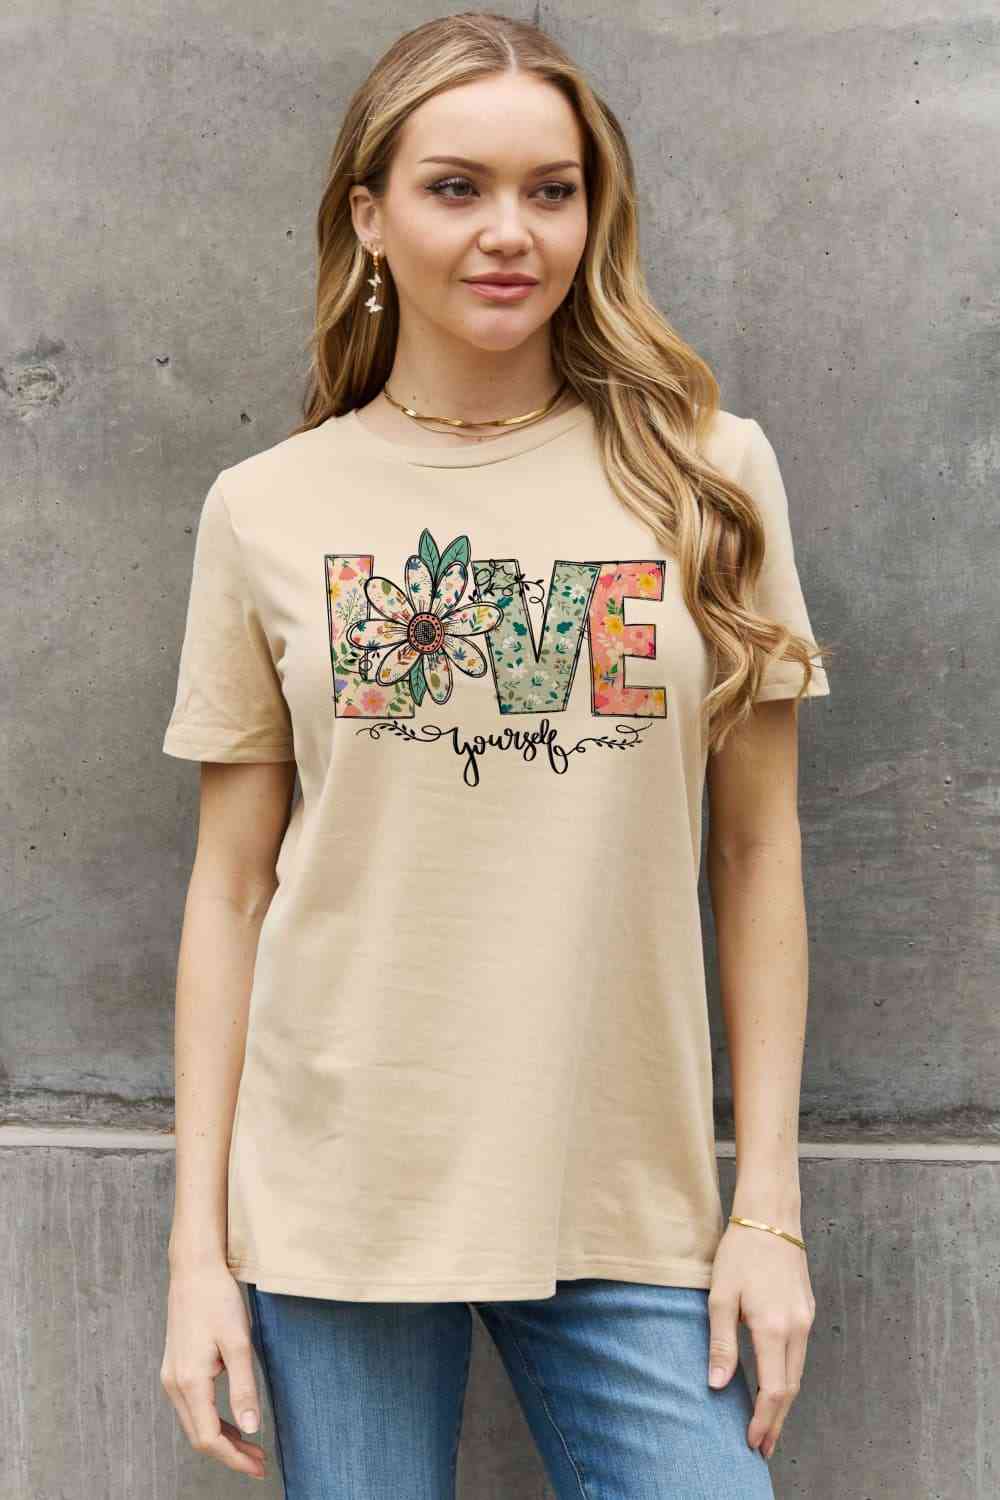 LOVE YOURSELF Graphic Cotton Tee - T-Shirts - Shirts & Tops - 9 - 2024